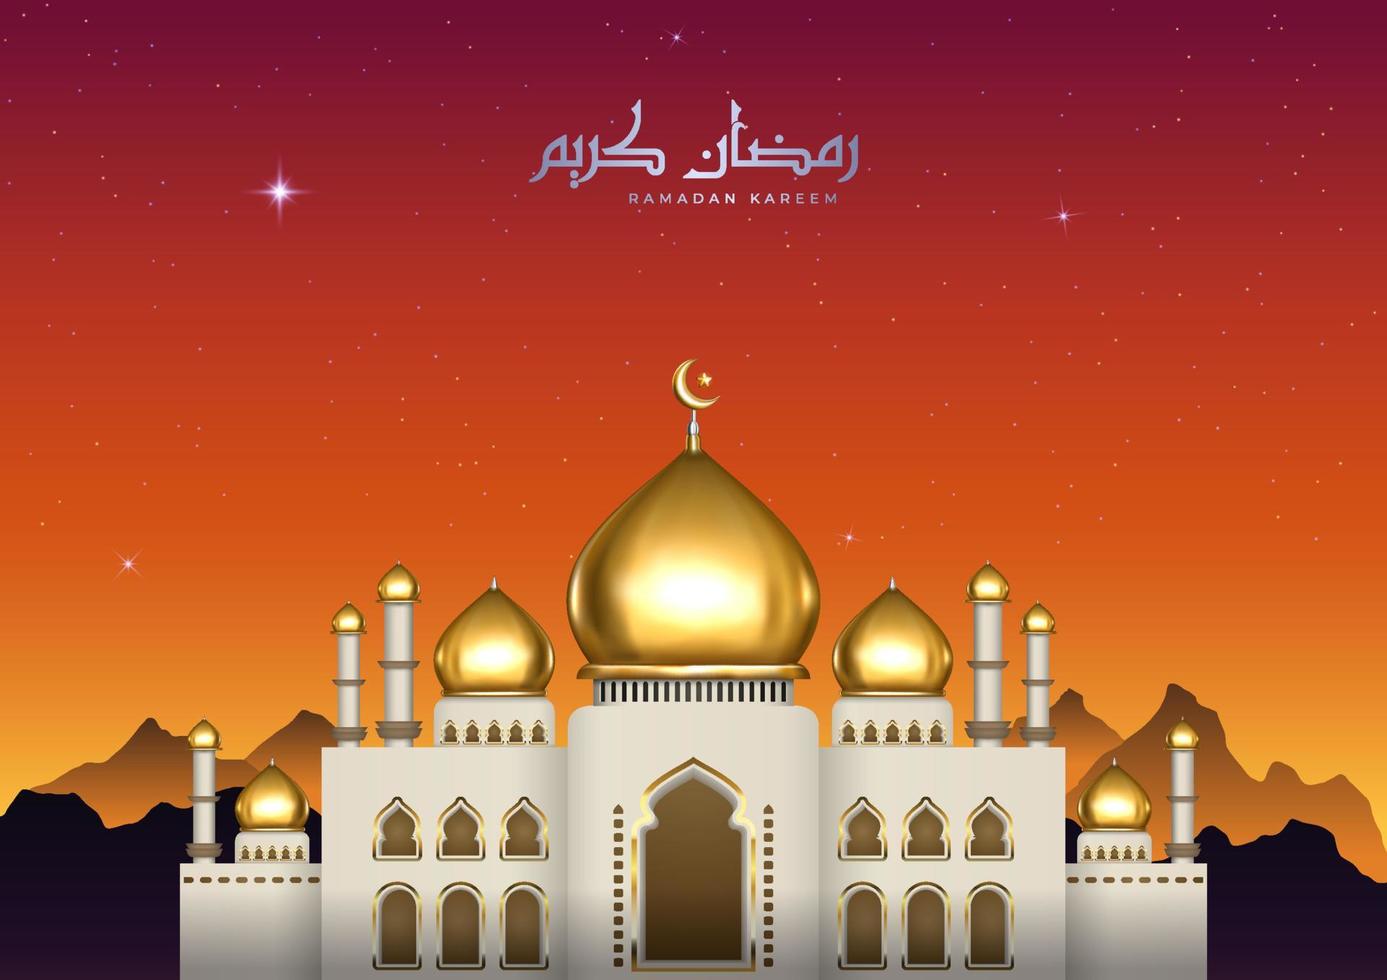 Beautiful Islamic illustration with Arabic calligraphy and gold mosque. Realistic Ramadan Kareem greeting card with sunset view vector